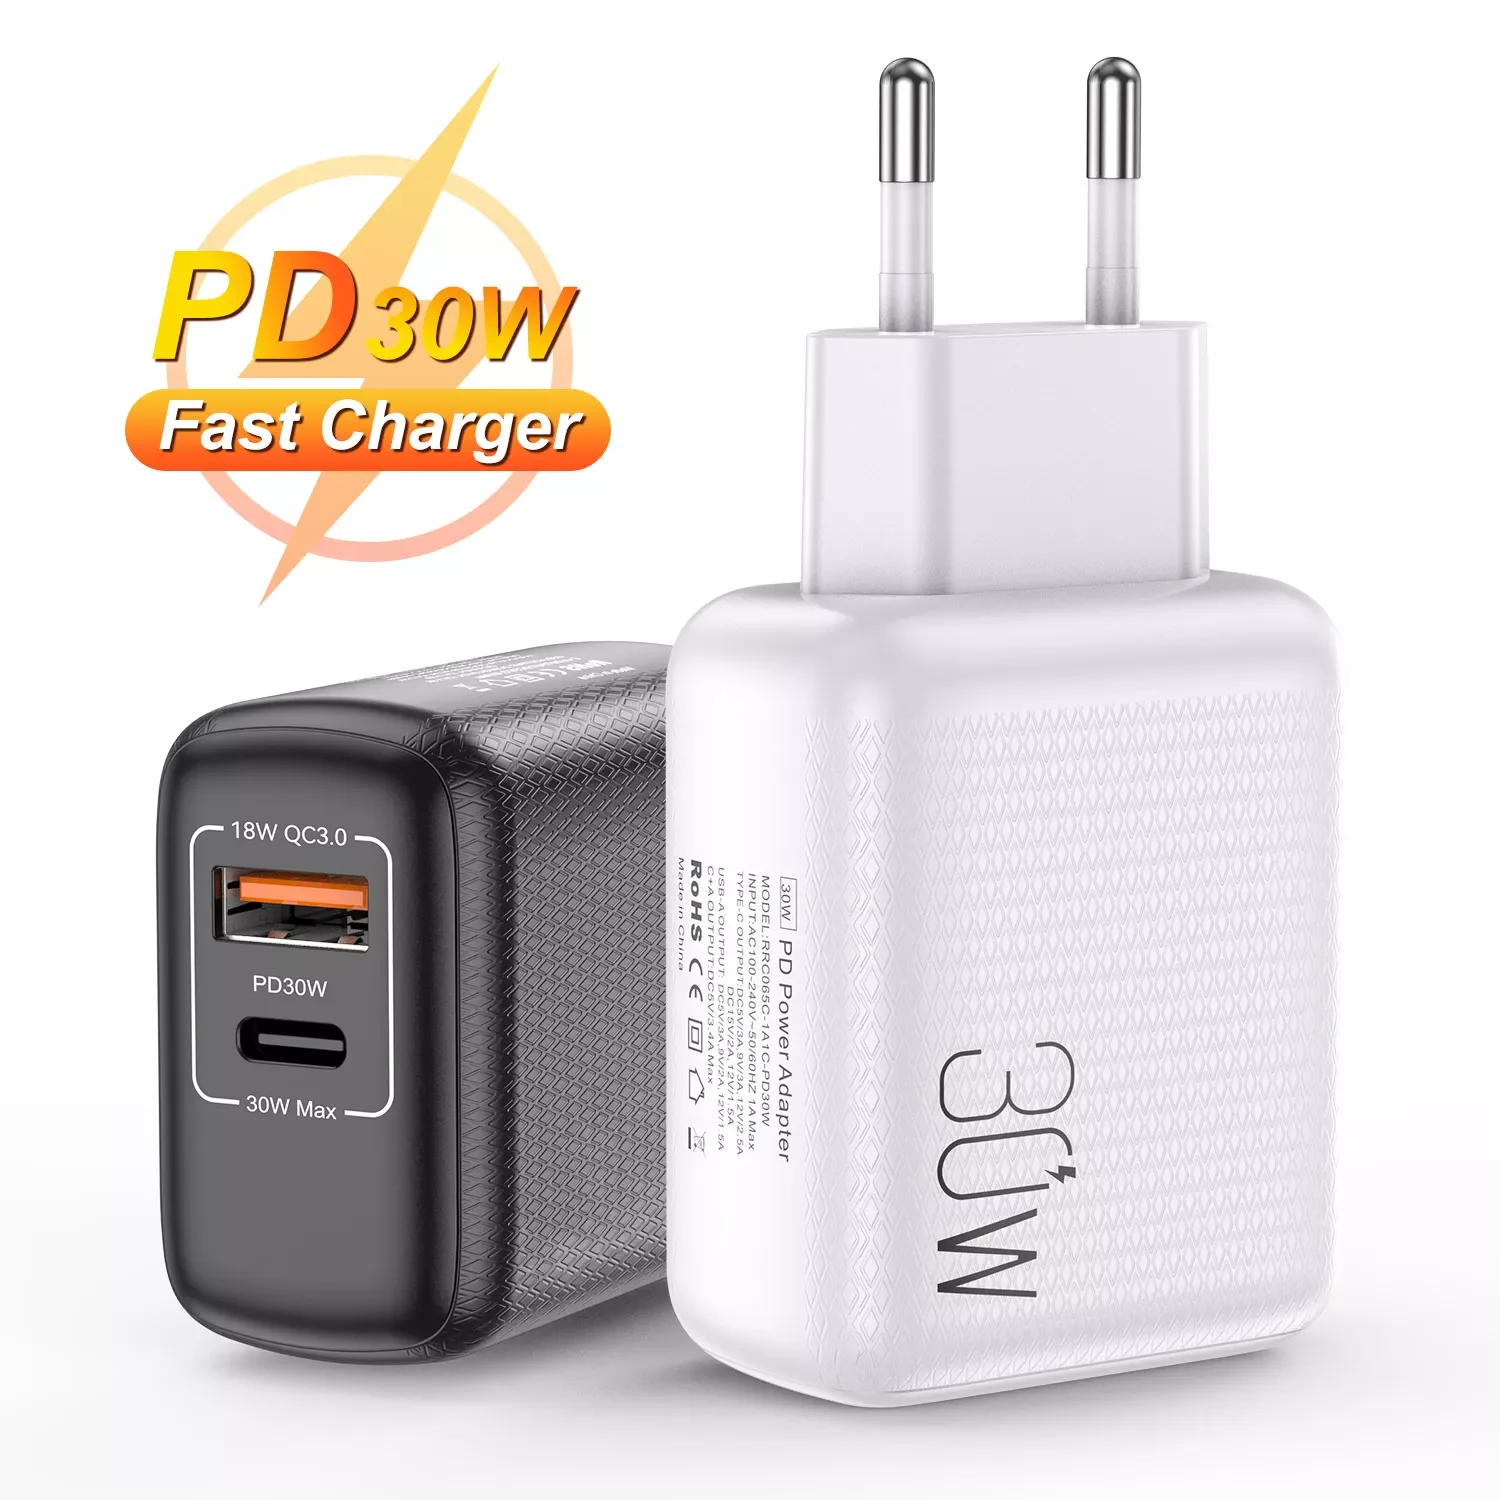 

Ports 30W USB Type C Quick Charge 3.0 QC PD Phone Charger QC3.0 18W PD3.0 Fast Charger For iPhone 13 12 Pro Max Mi 11